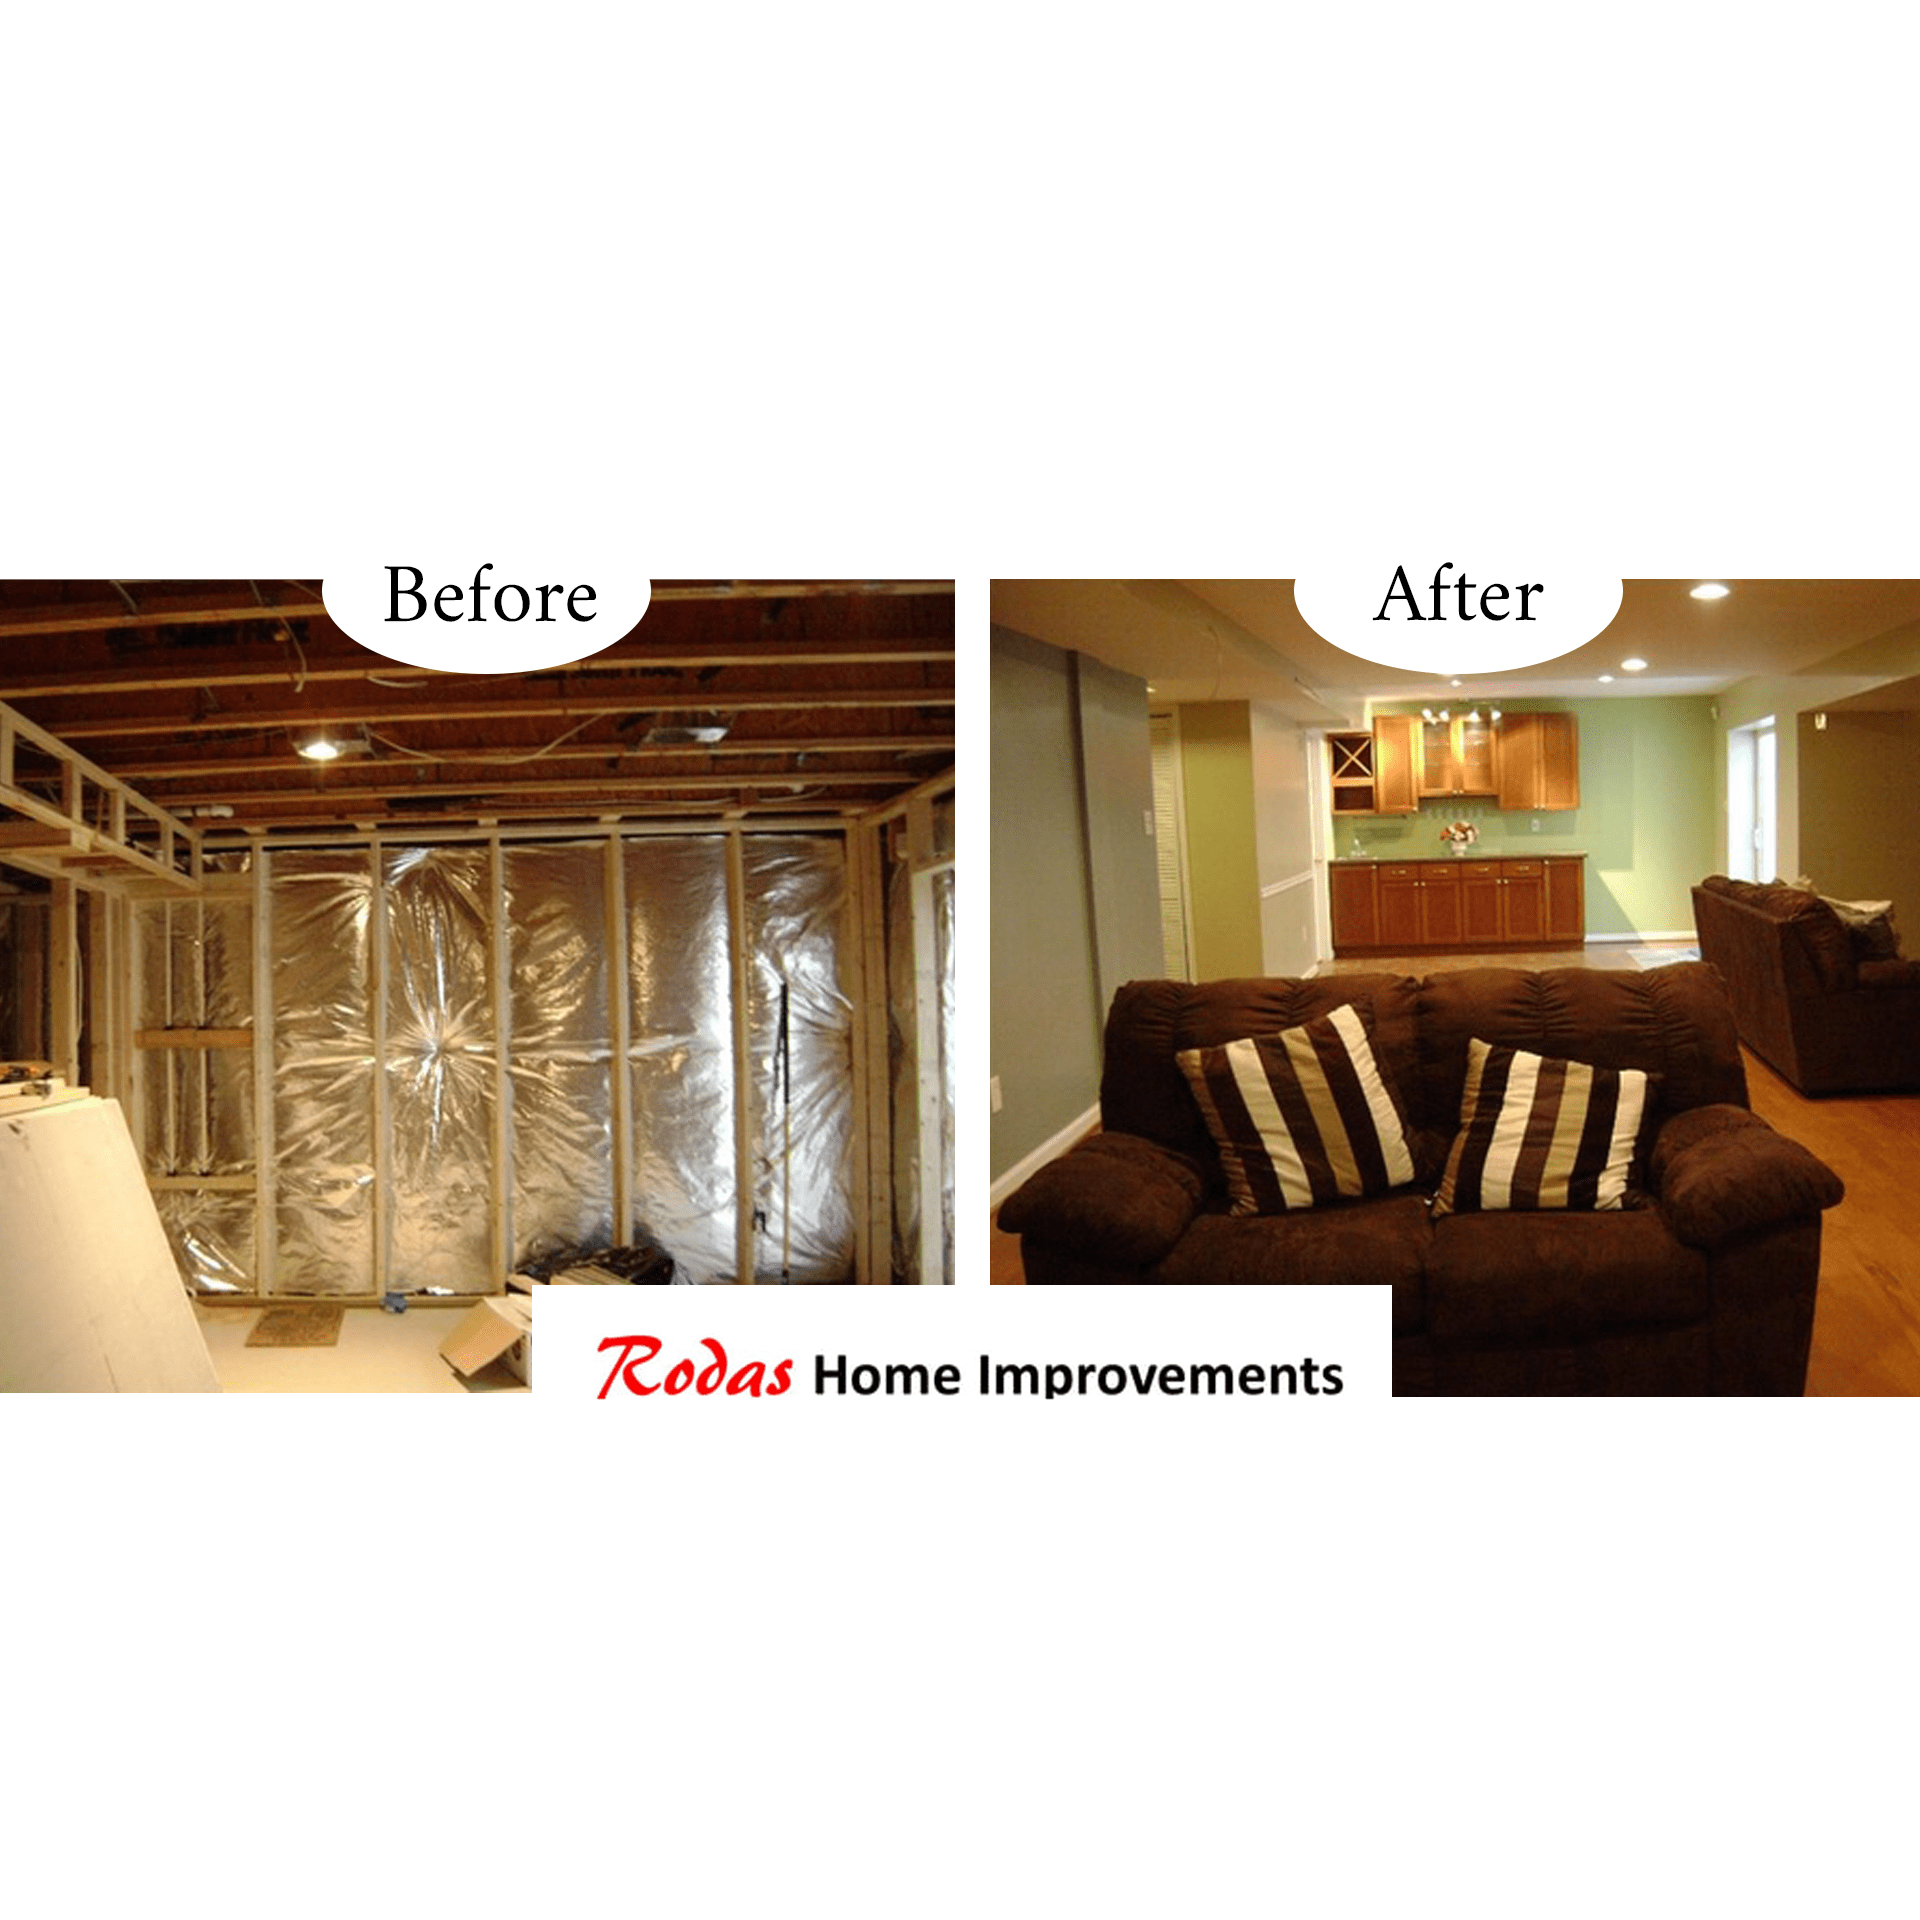 Before and After Home Improvements